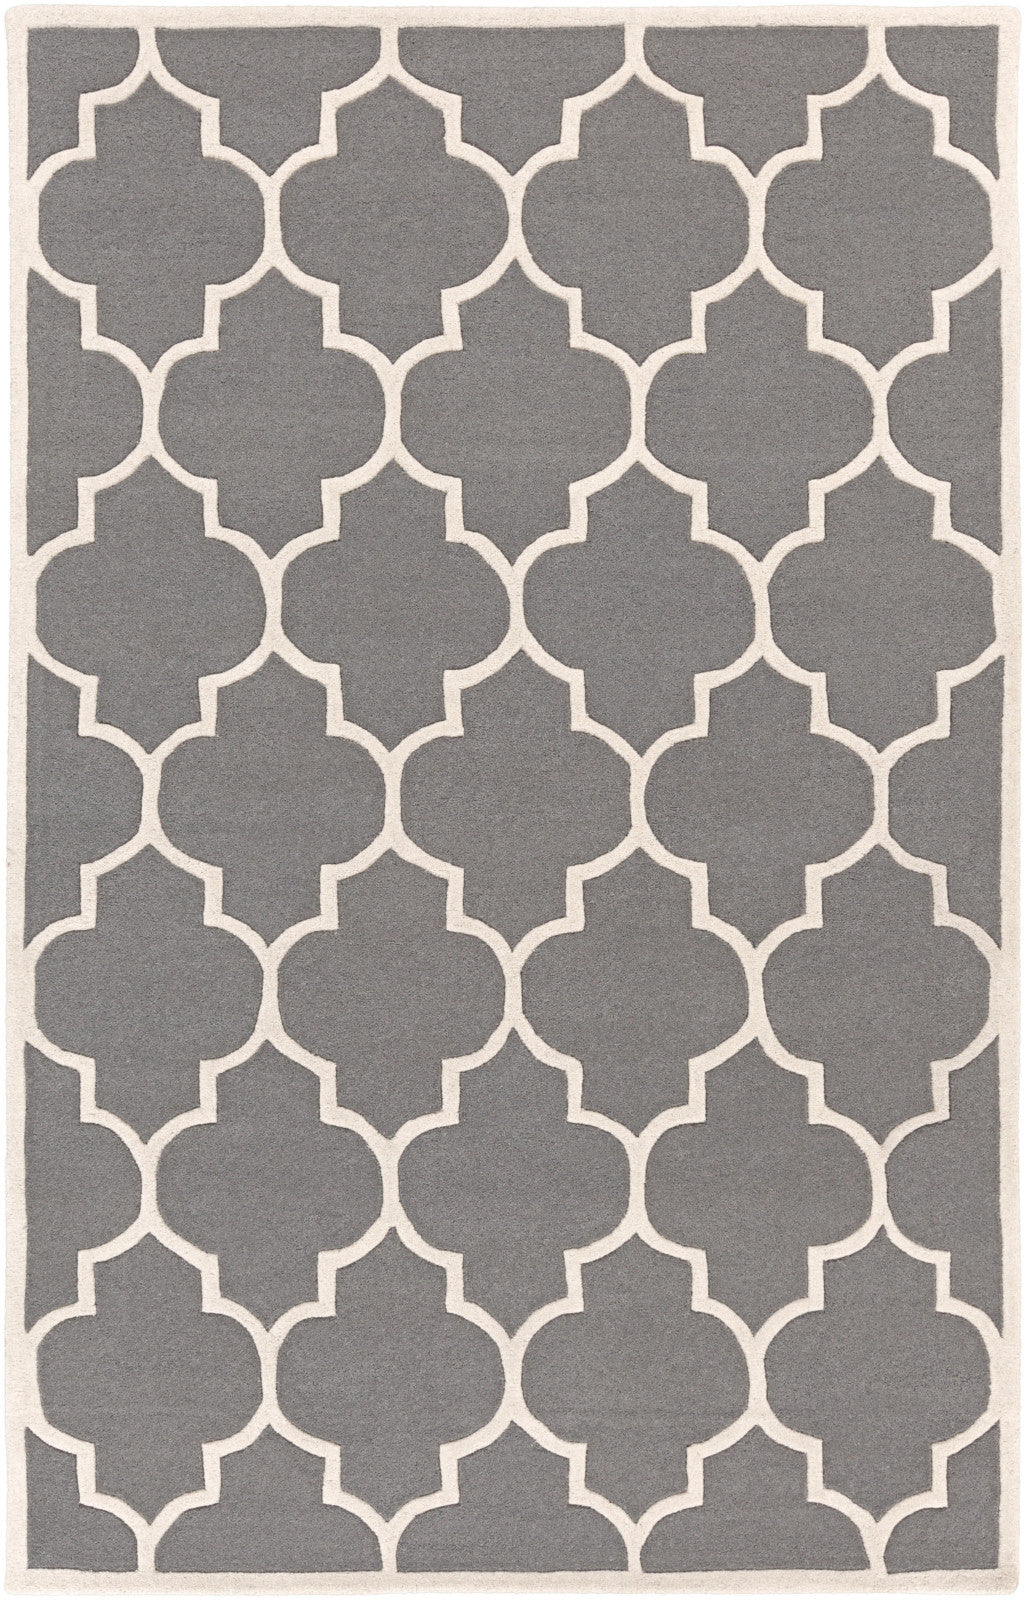 Artistic Weavers Transit Piper Gray/Ivory Area Rug main image